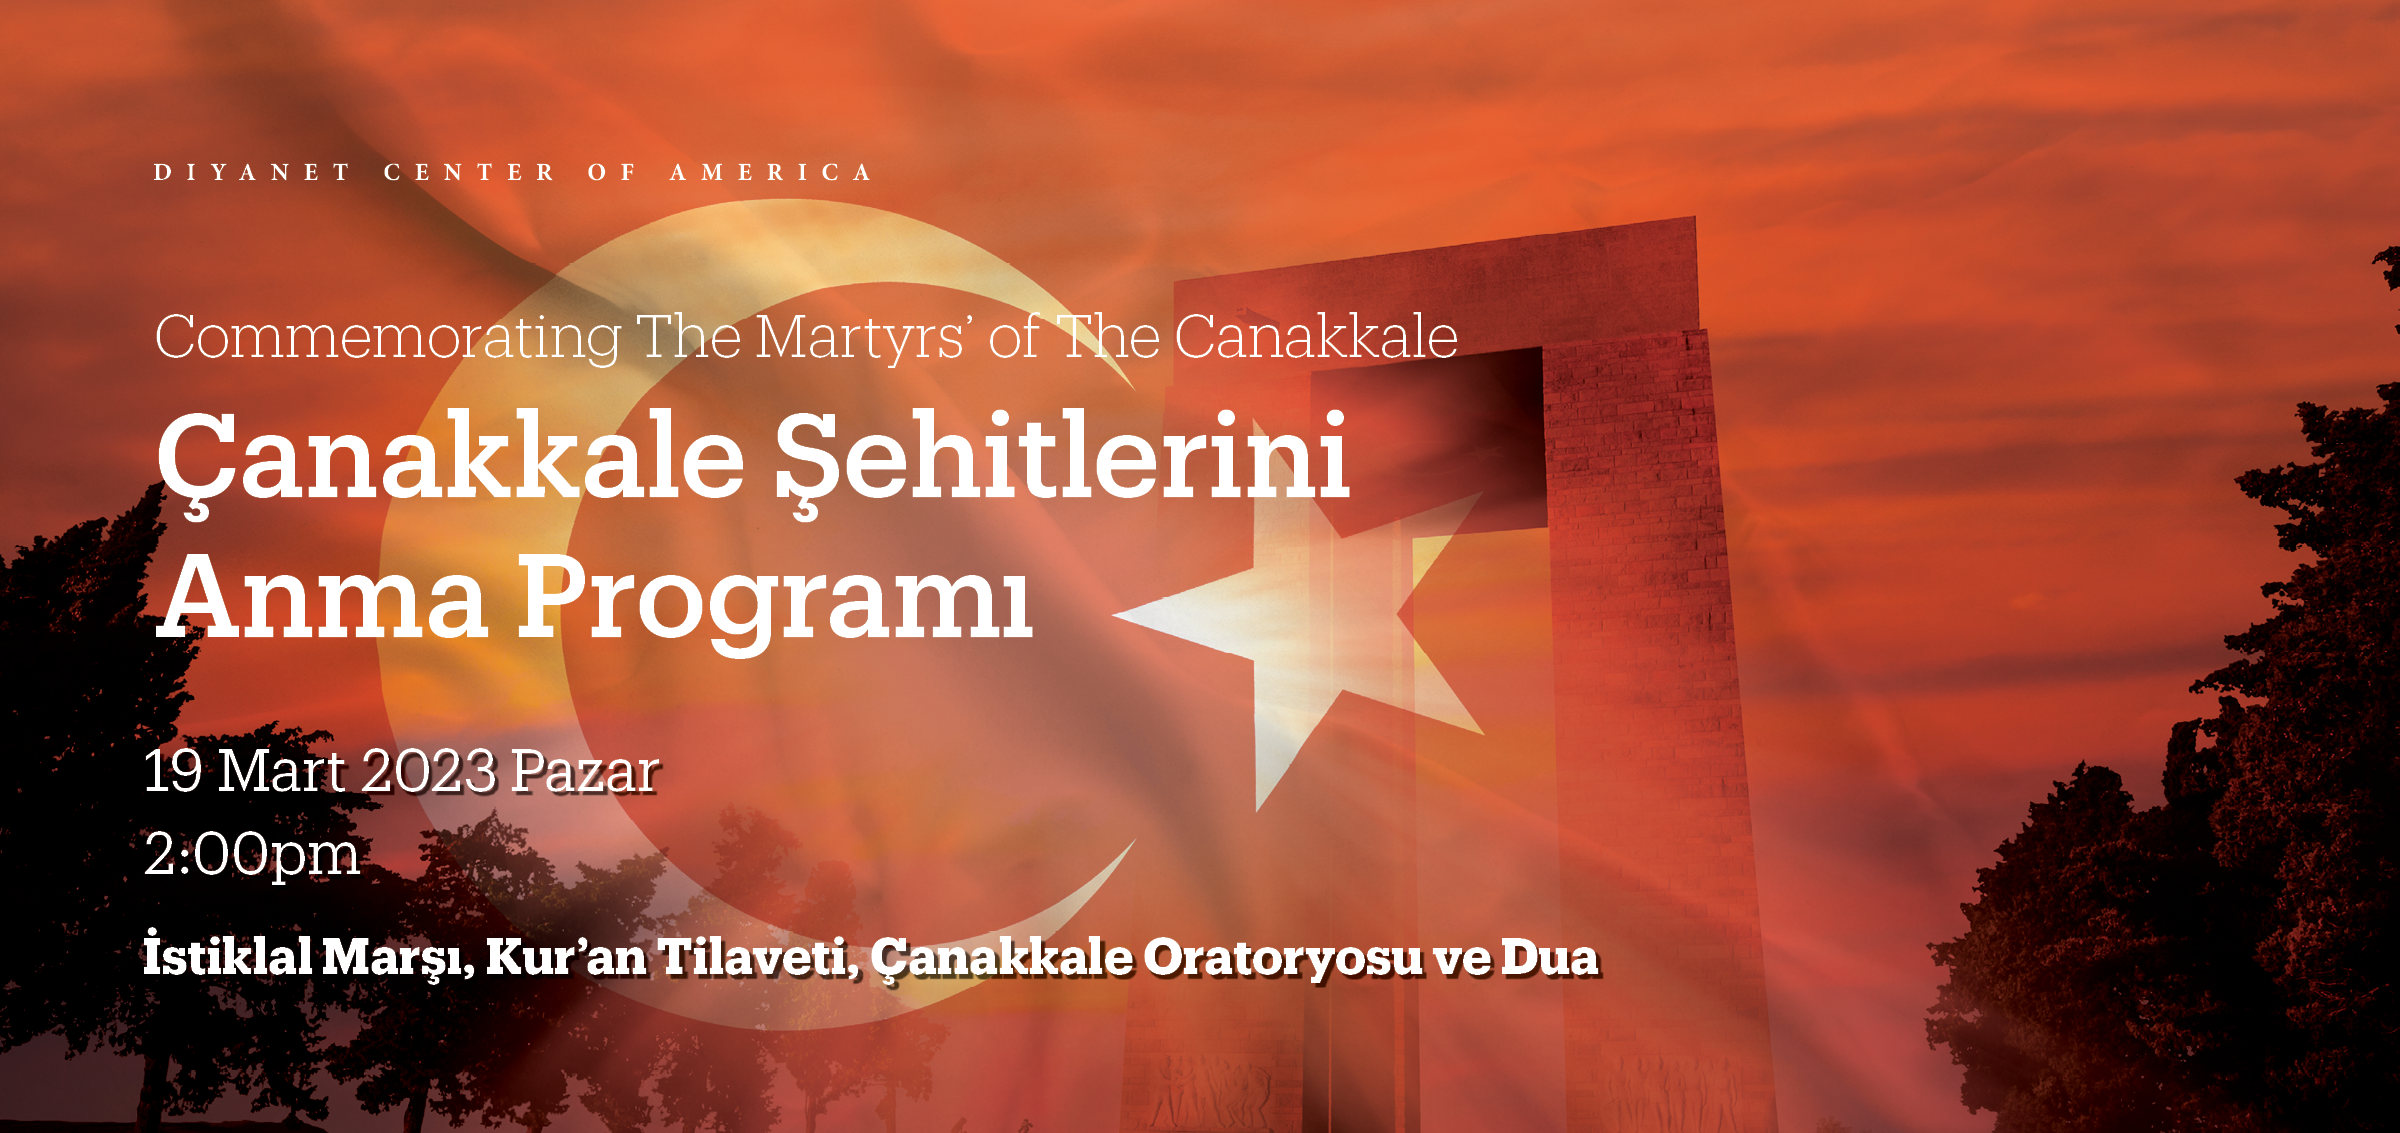 Canakkale (Battle of Gallipoli) Martyrs' Memorial Day